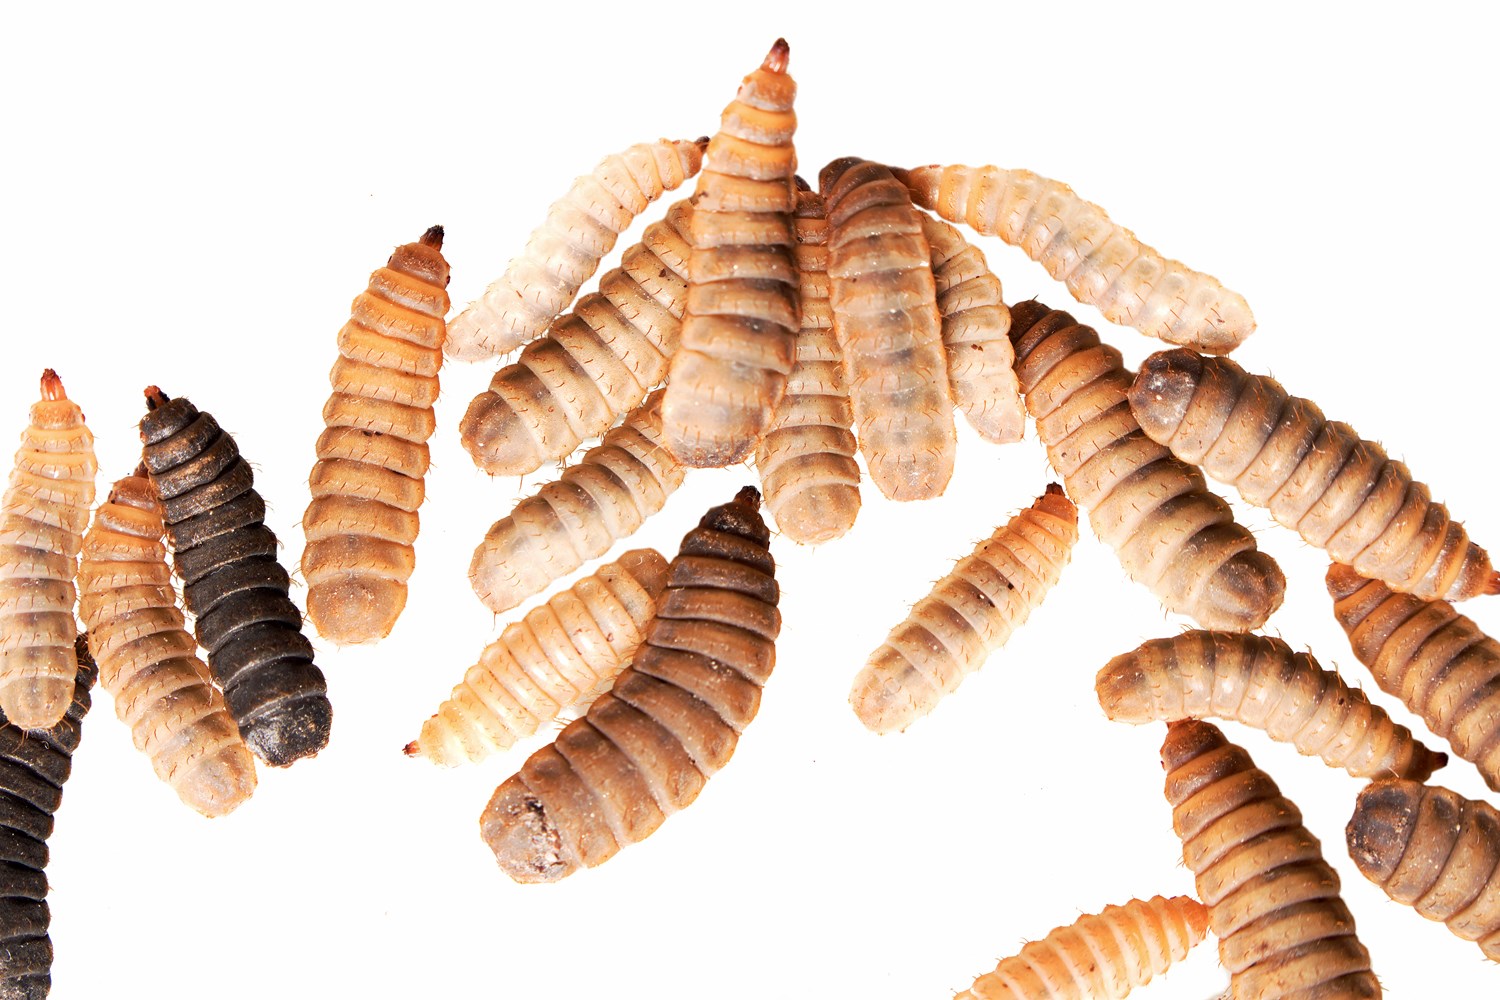 Black Soldier Fly larvae (insect protein)